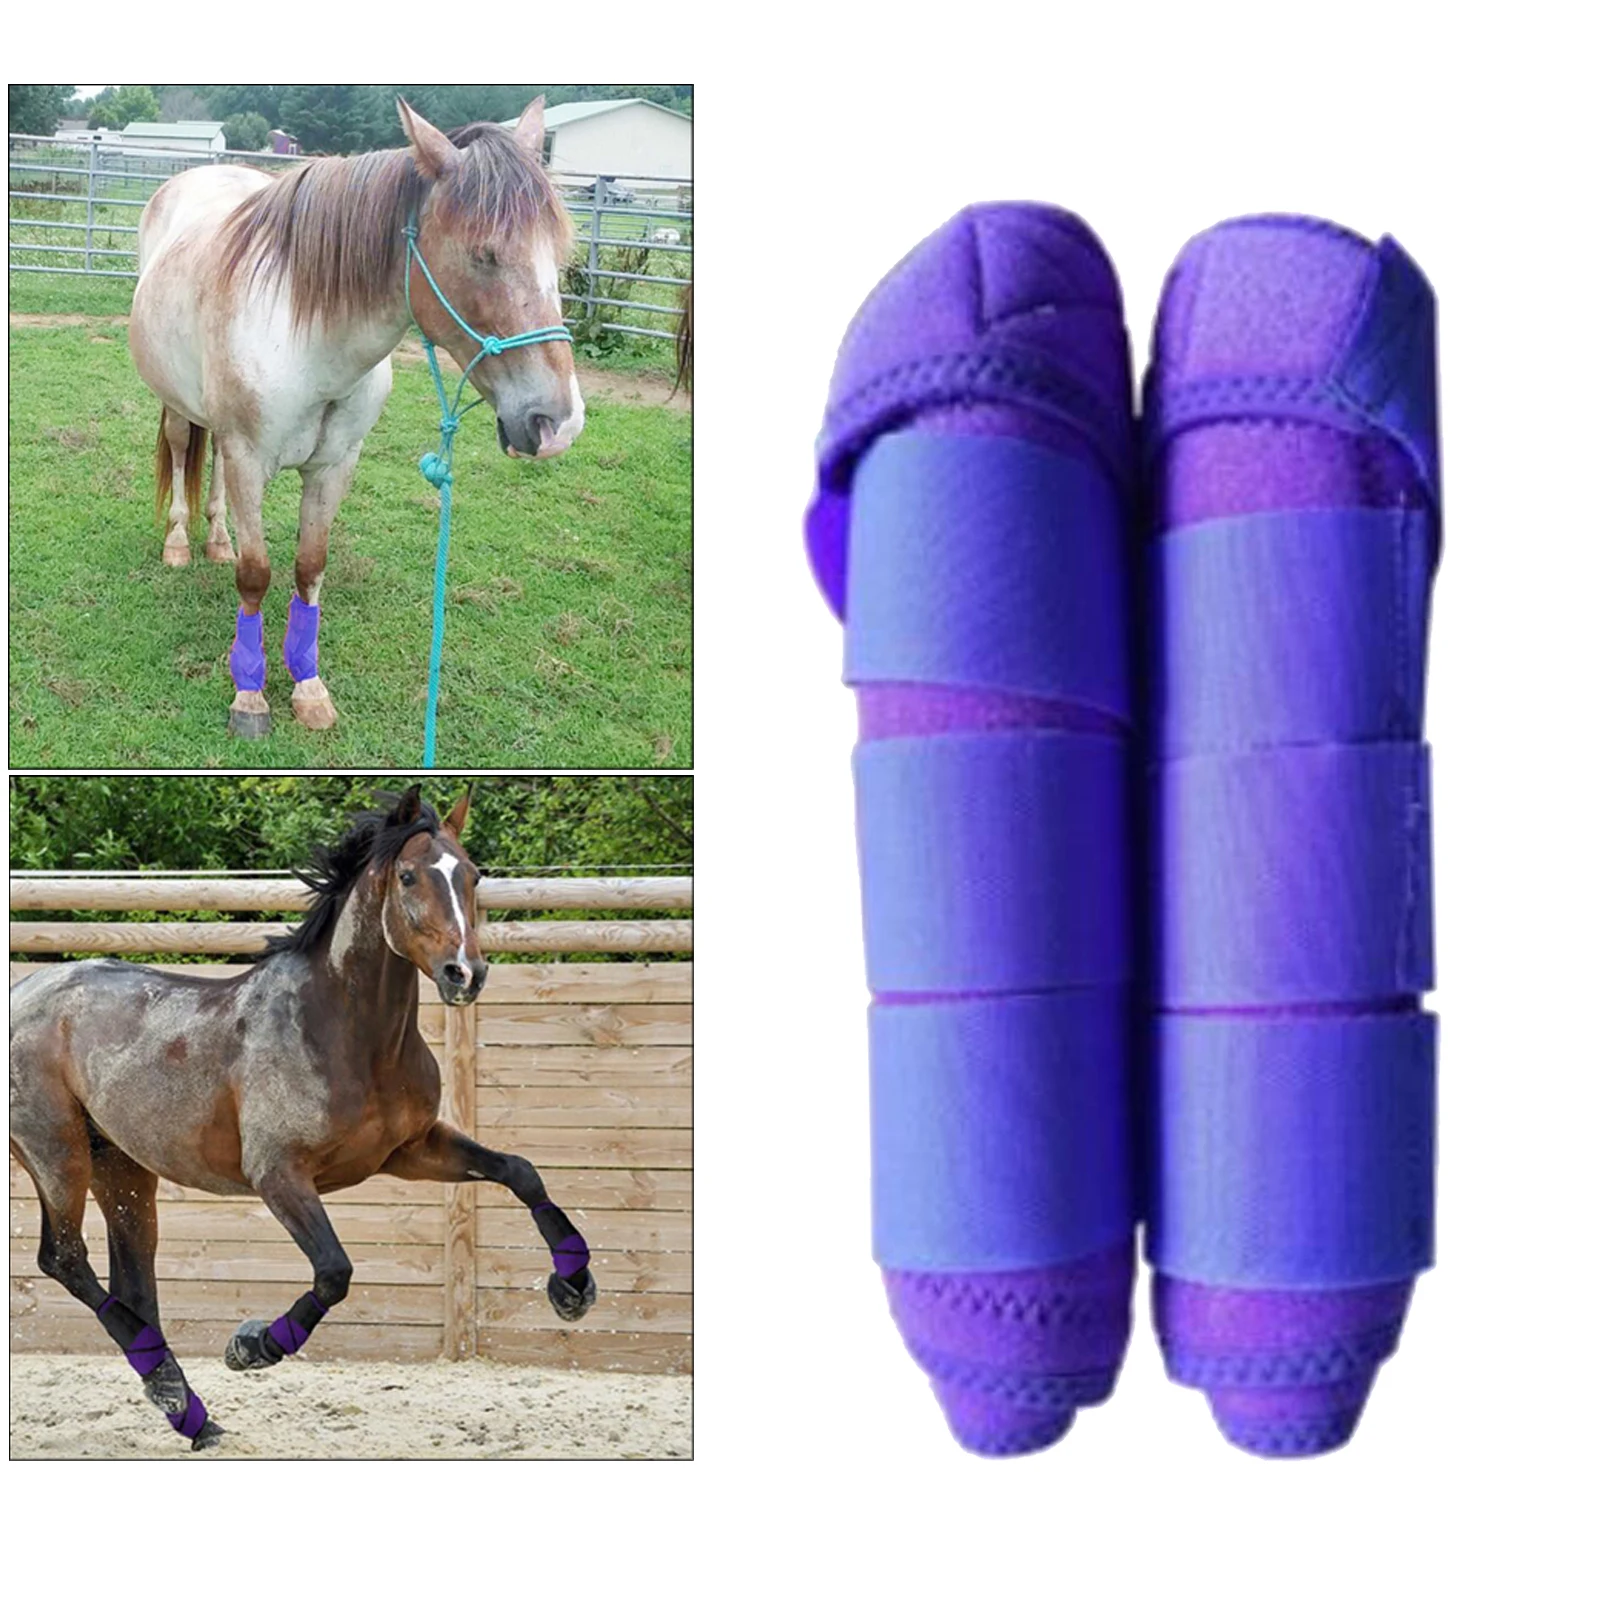 Protective Lightweight Horse Tendon Boots Equine Sport Leg Prtoector Brushing Boot Equipments for Training Jumping and Turnout